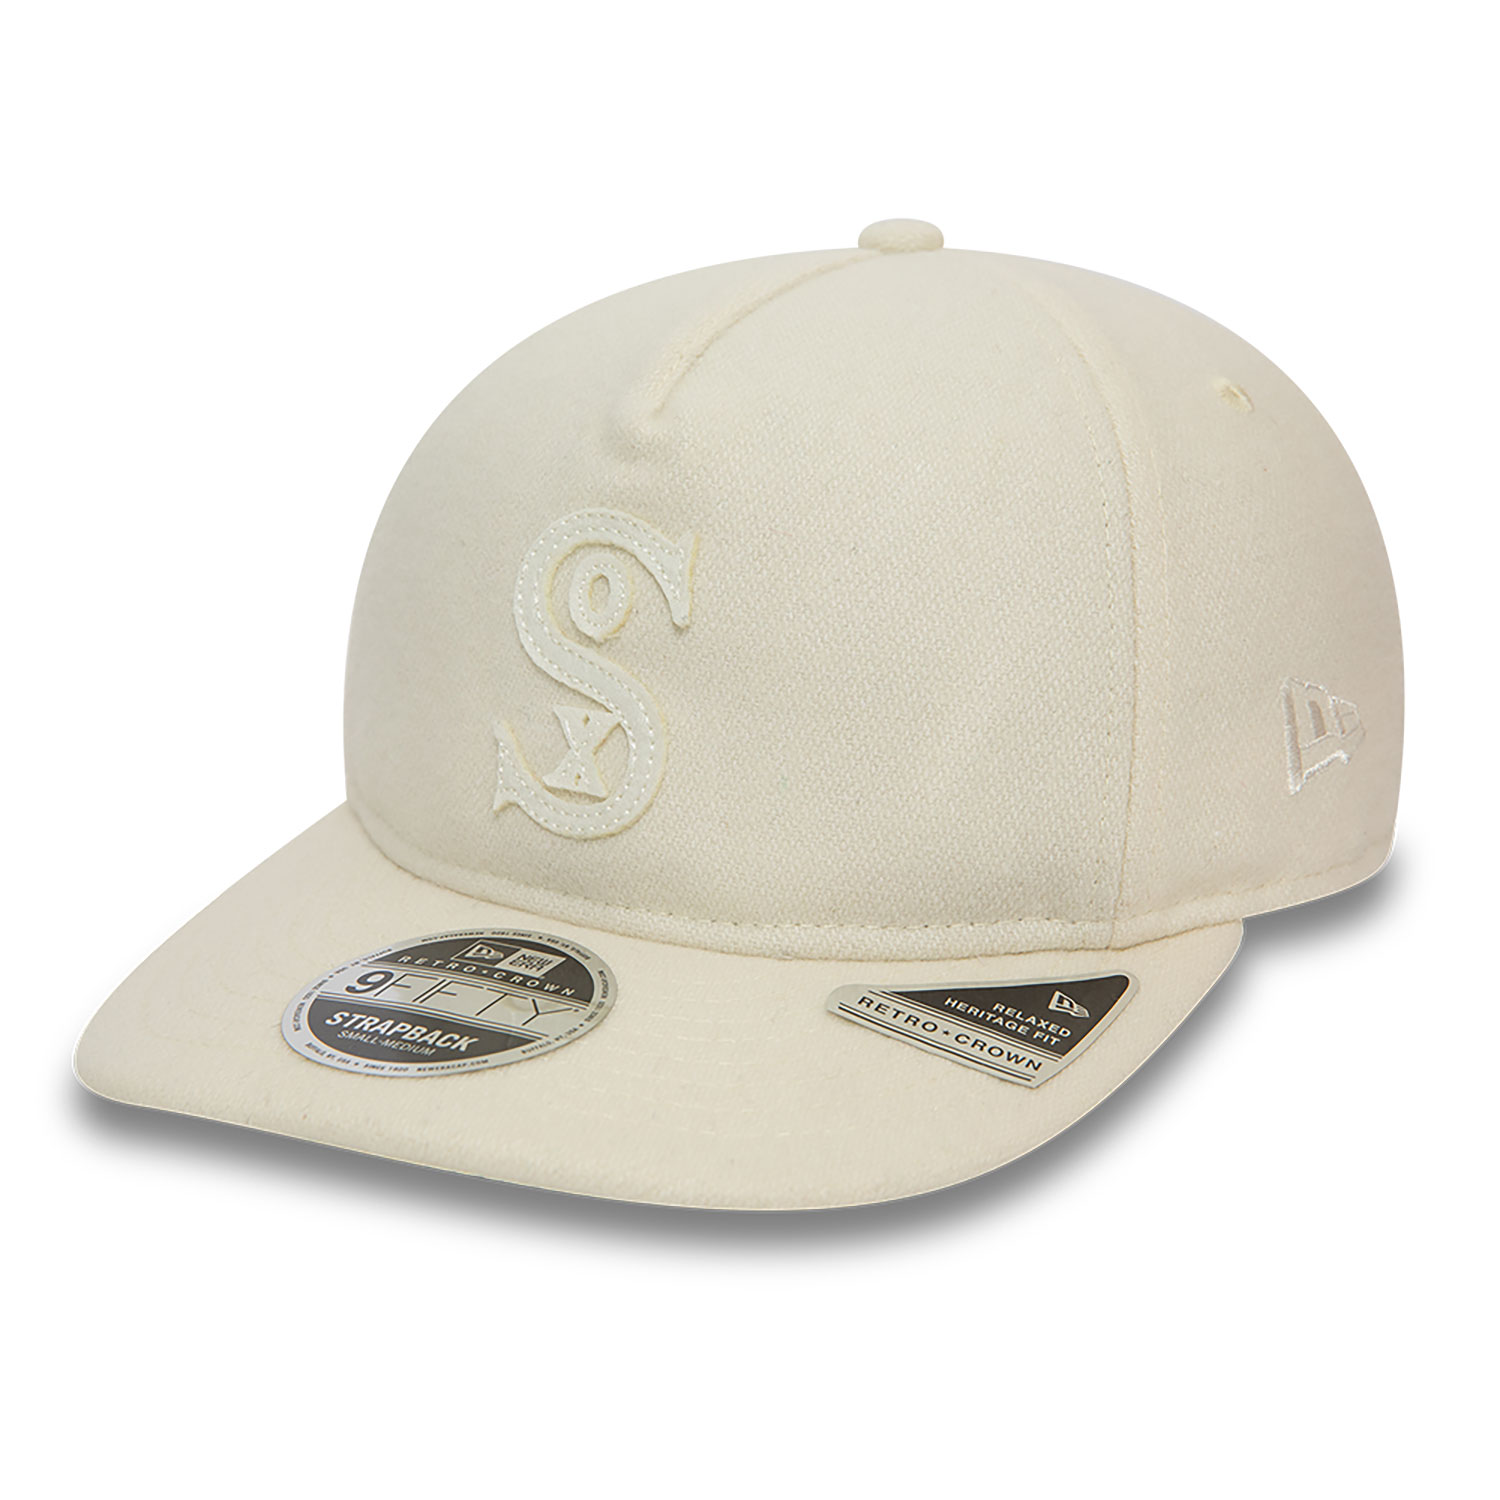 Chicago White Sox MLB Cooperstown Off White Retrocrown 9FIFTY Strapback Cap